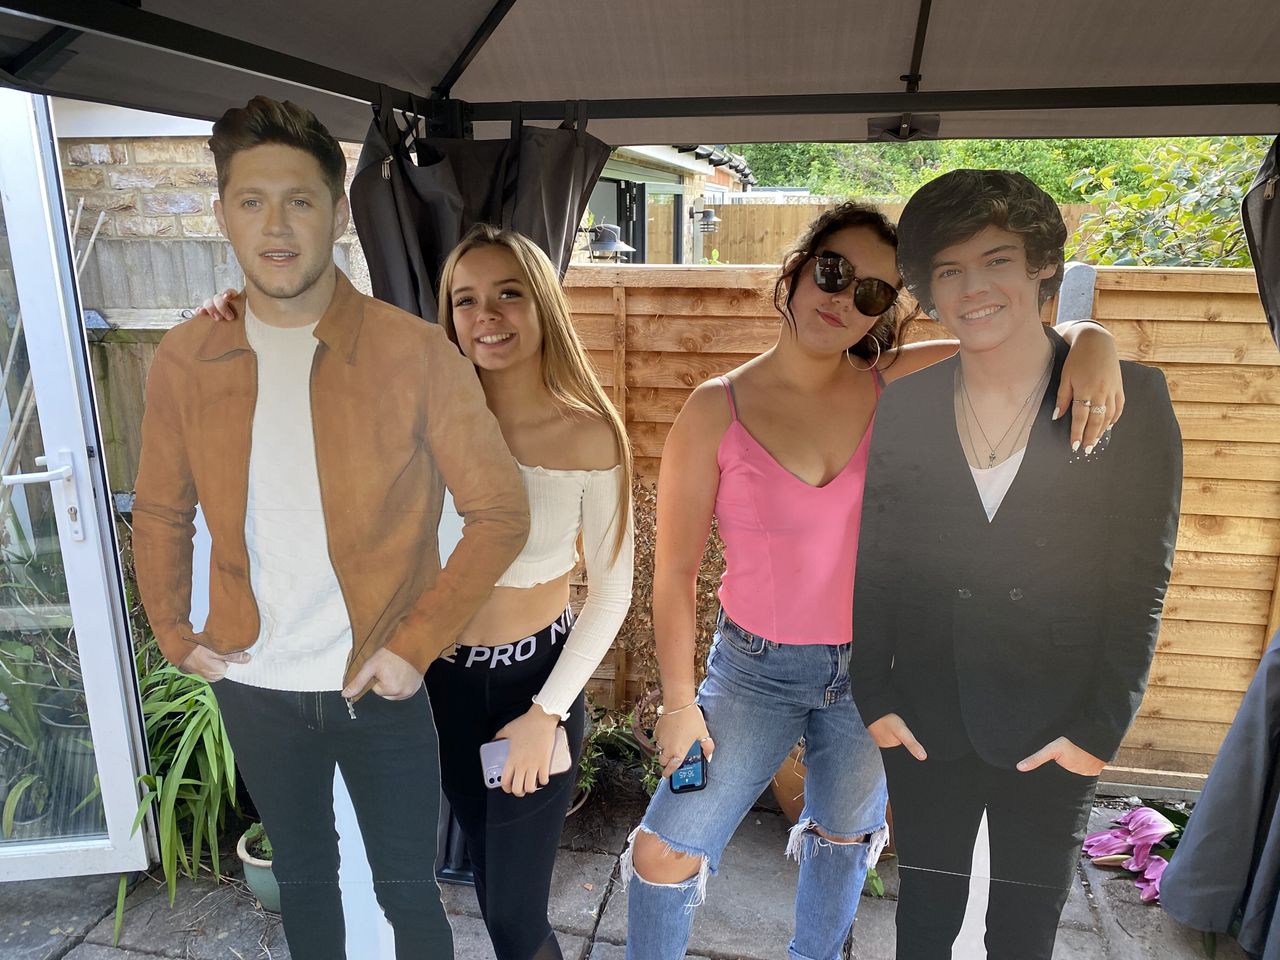 One Direction fan Millie, right, with her sister Jessie, left, standing with One Direction cutout figures of Harry and Niall